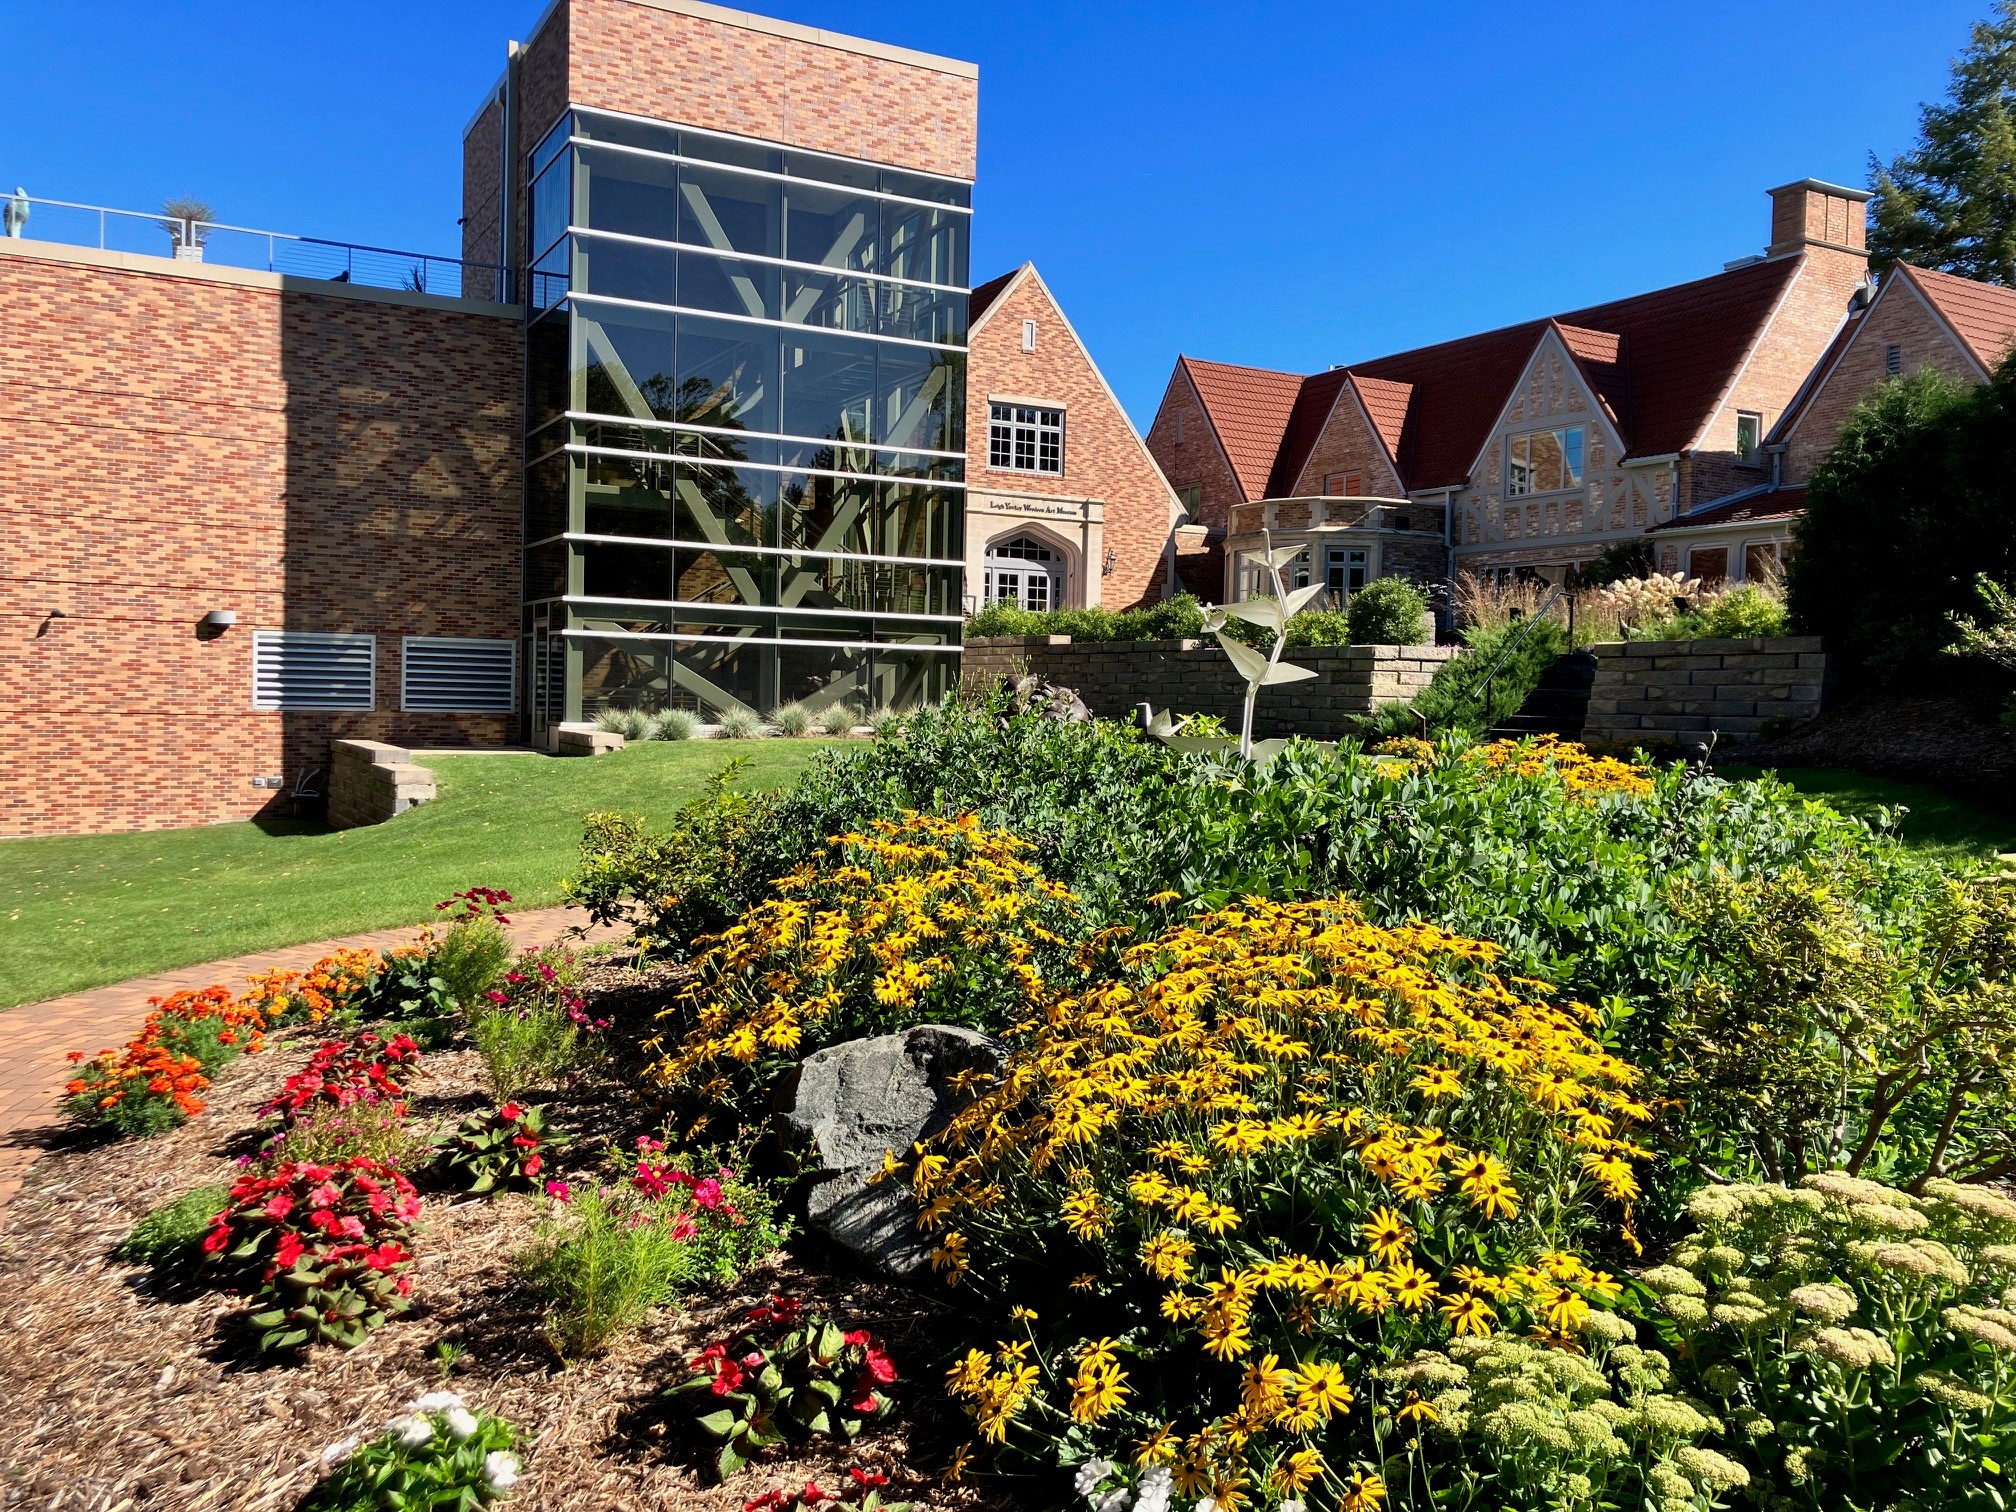 This image shows the Woodson Art Museum's grounds in full bloom with flowers in the foreground and the Museum's main entrance in the background